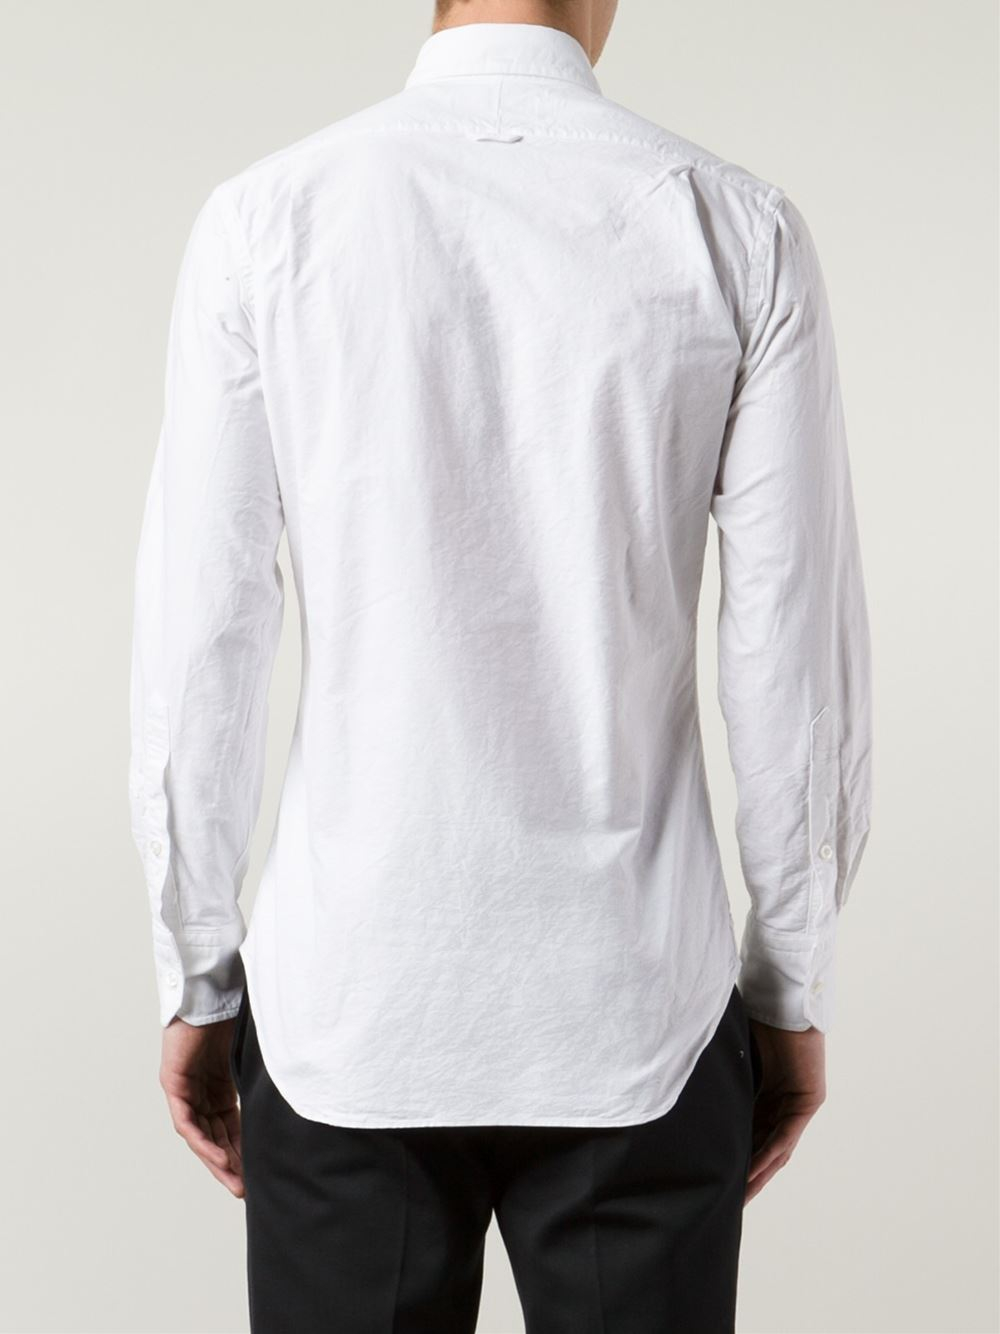 Thom browne Striped Collar Shirt in White for Men | Lyst